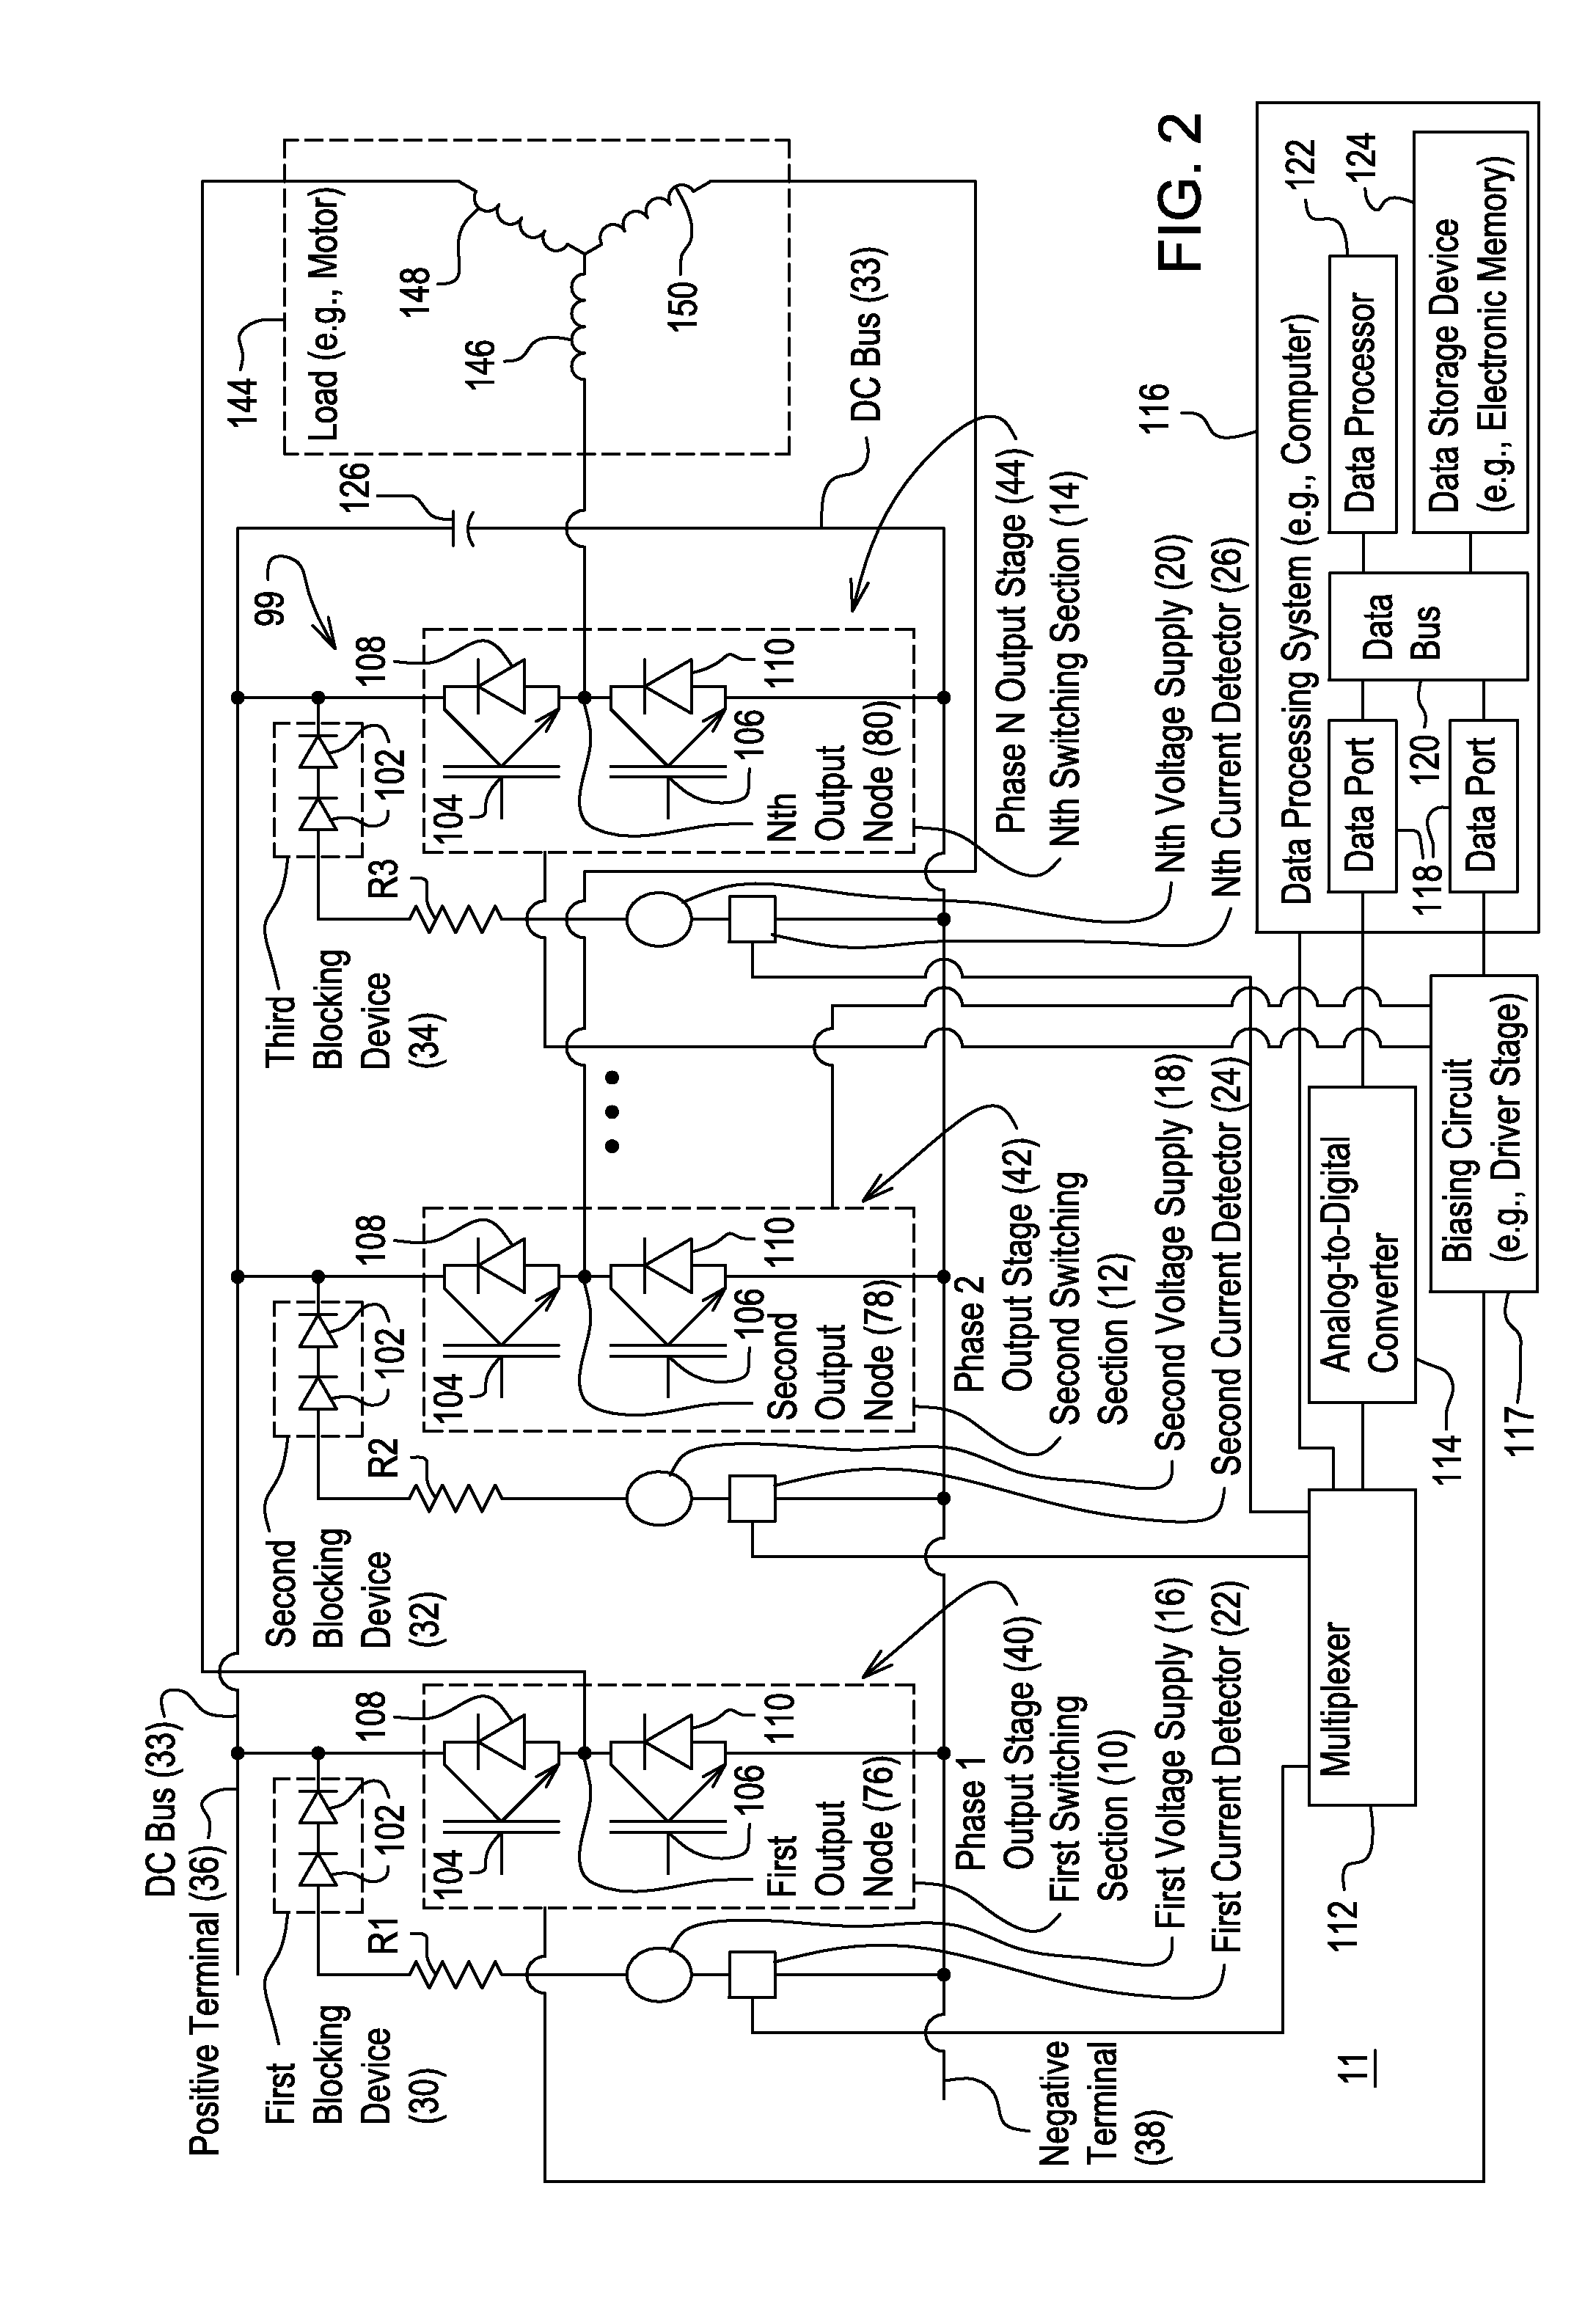 System for detecting a short circuit associated with a direct current bus